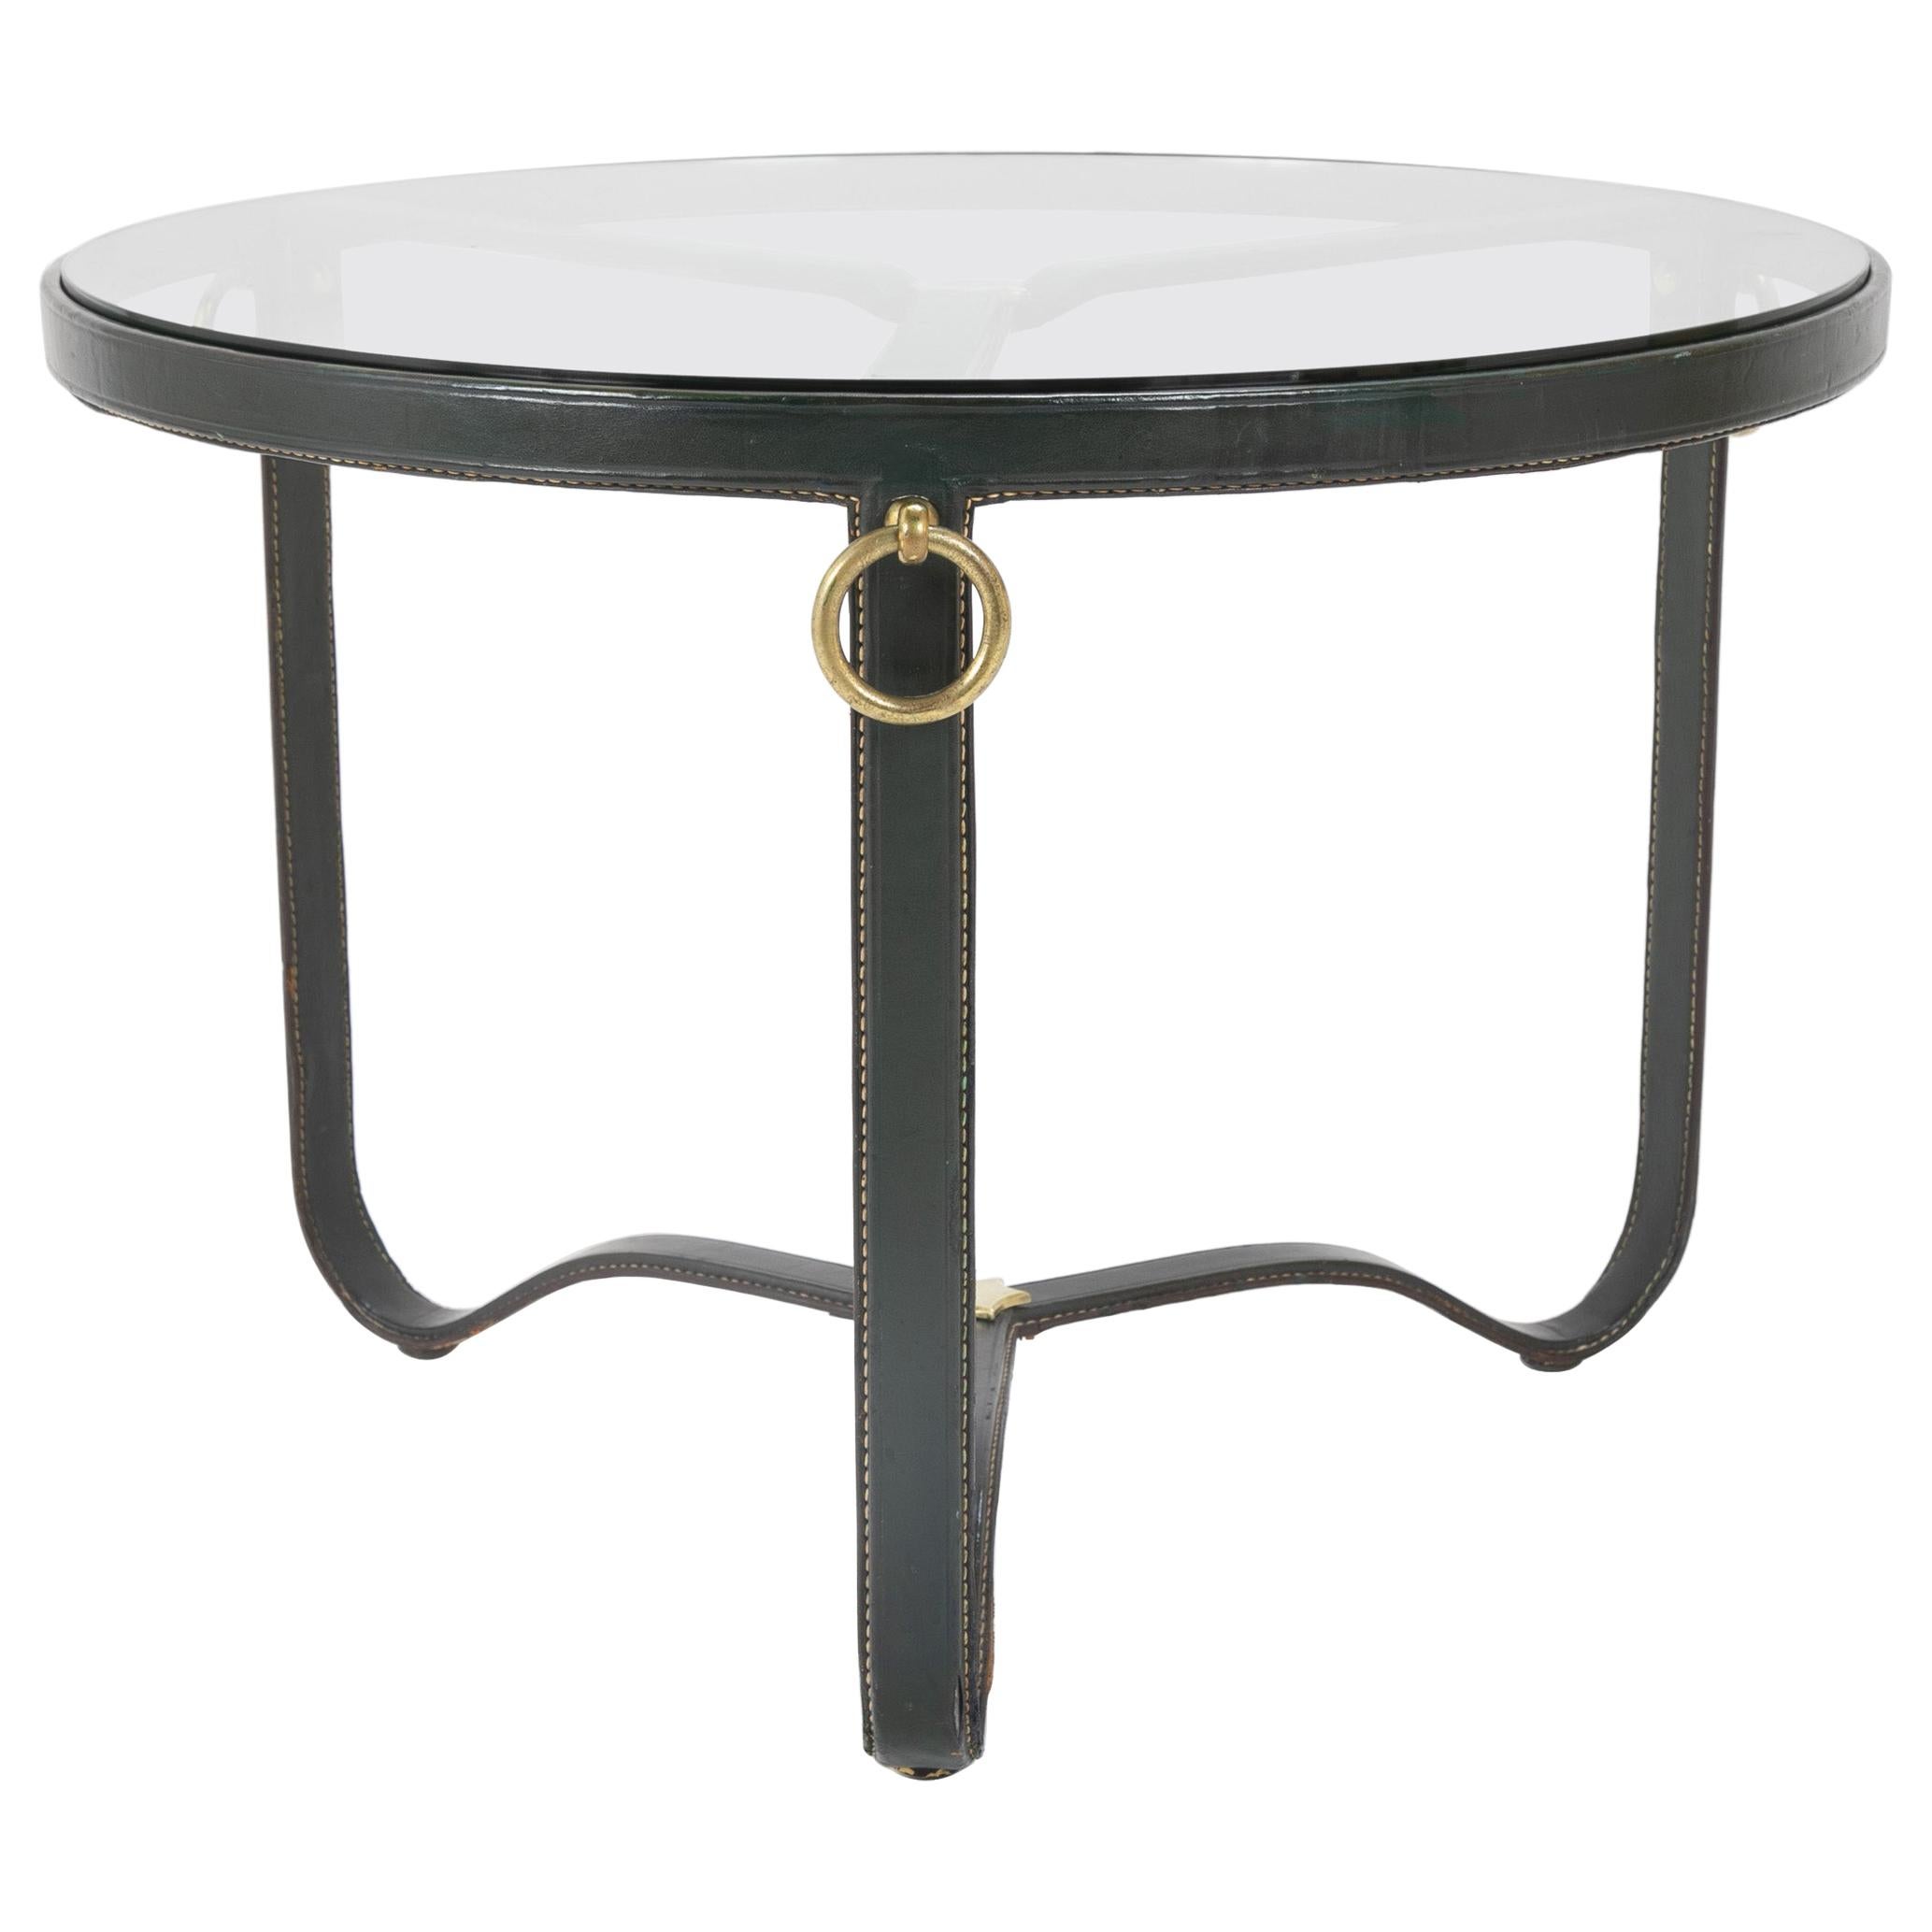 Stitched Leather and Brass Coffee Table Designed by Jacque Adnet